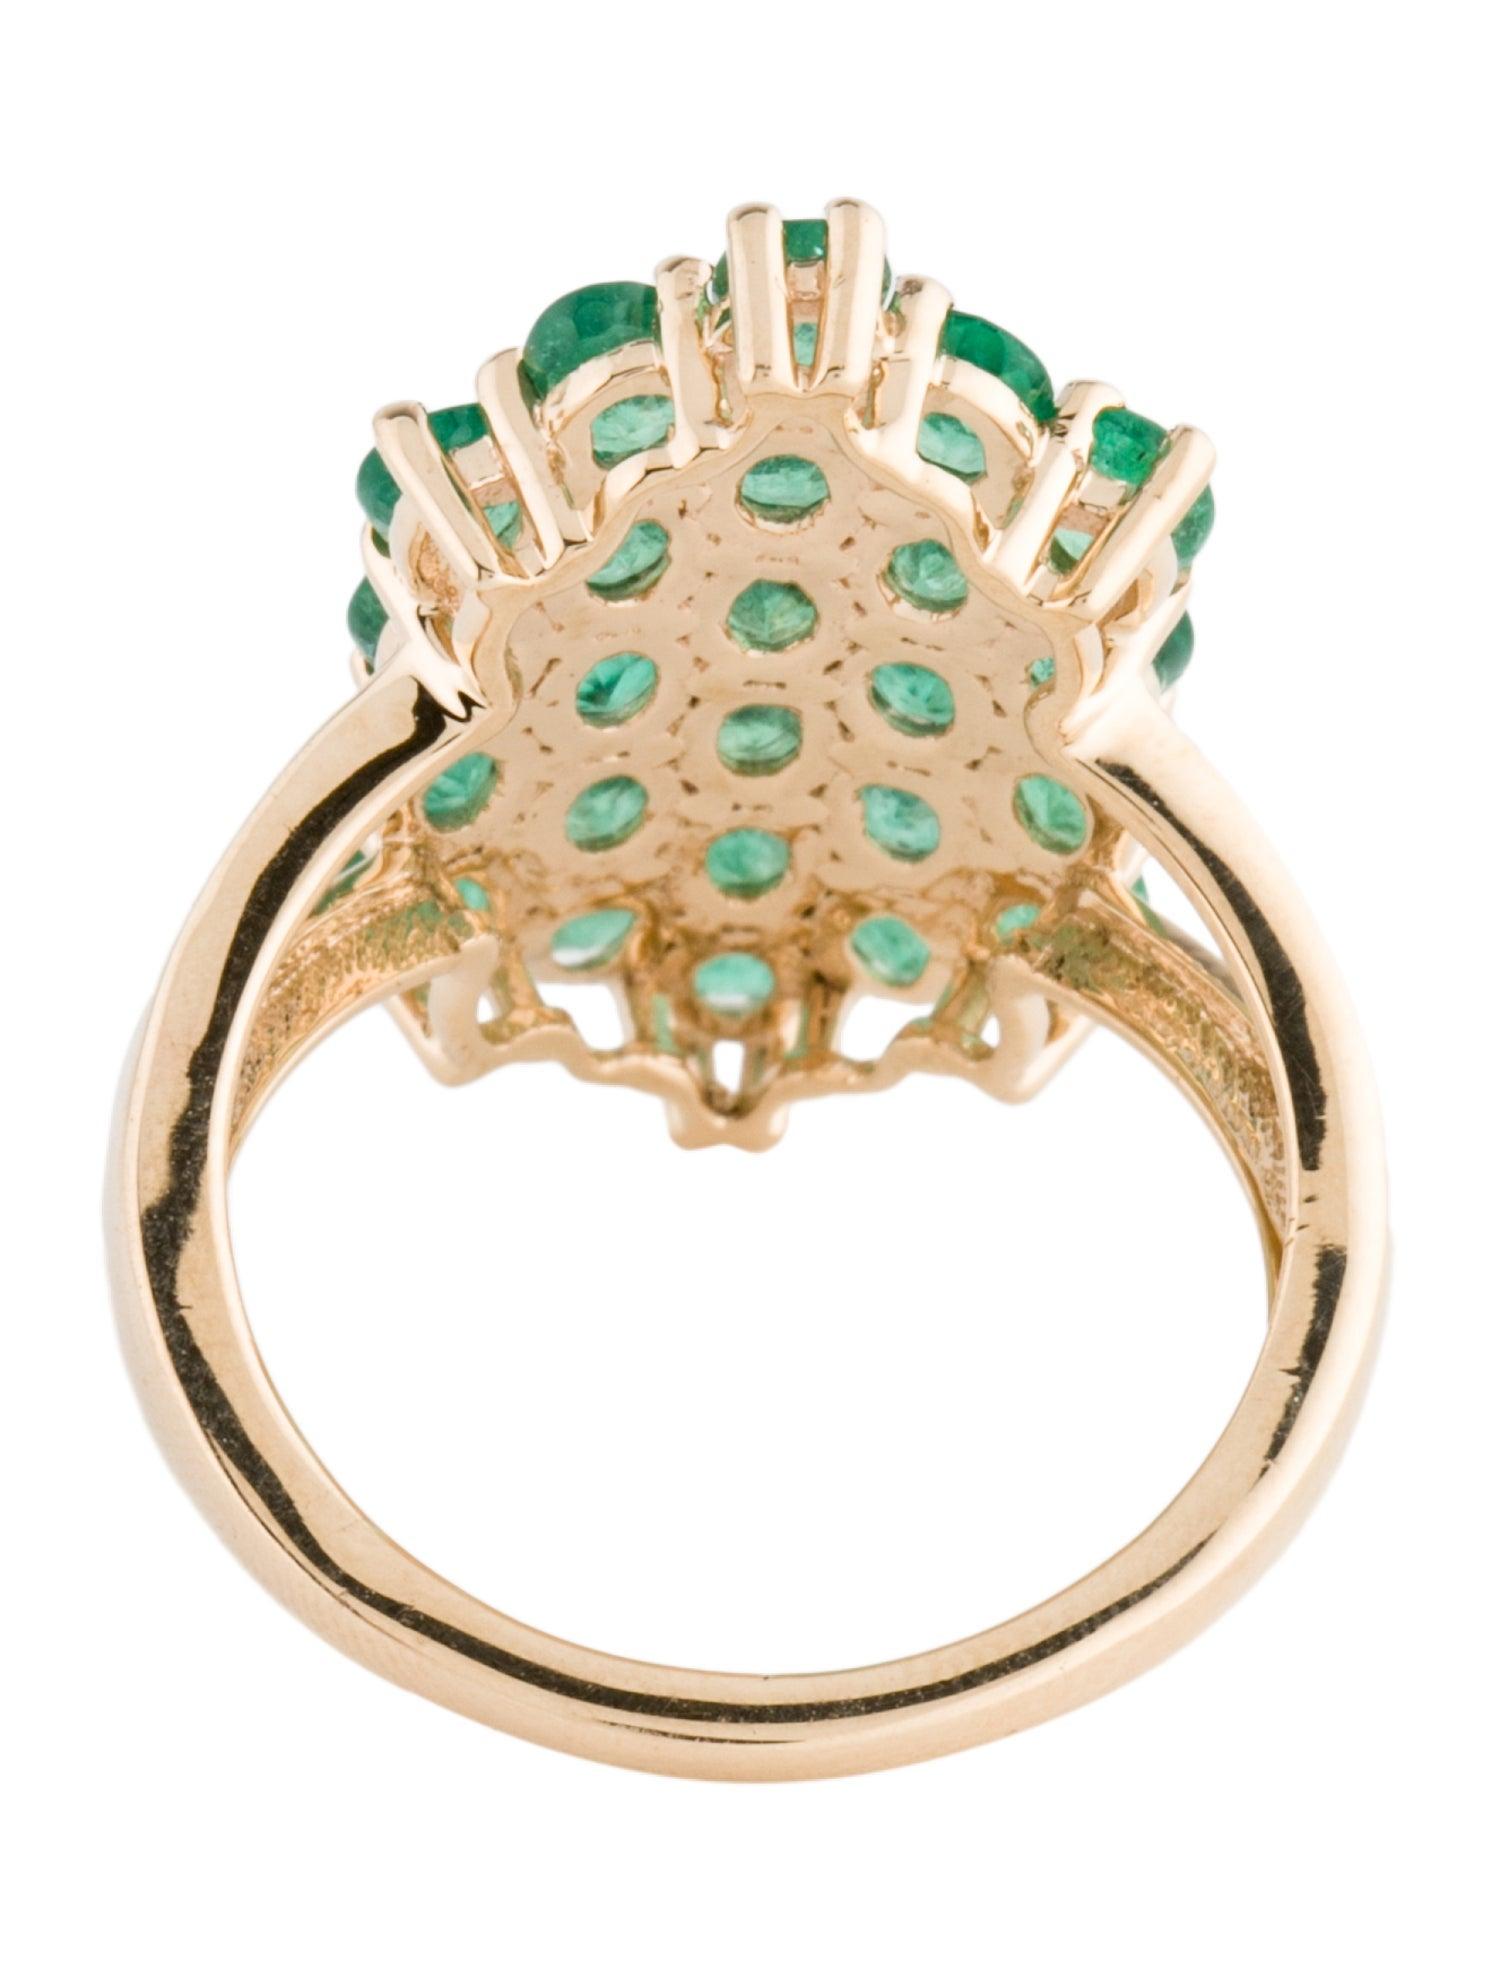 Immerse yourself in the enchanting allure of nature with our Forest Ferns Emerald Elegance Ring, a mesmerizing piece from Jeweltique's renowned collection. This exquisite ring is a celebration of the lush beauty found in the heart of the world's